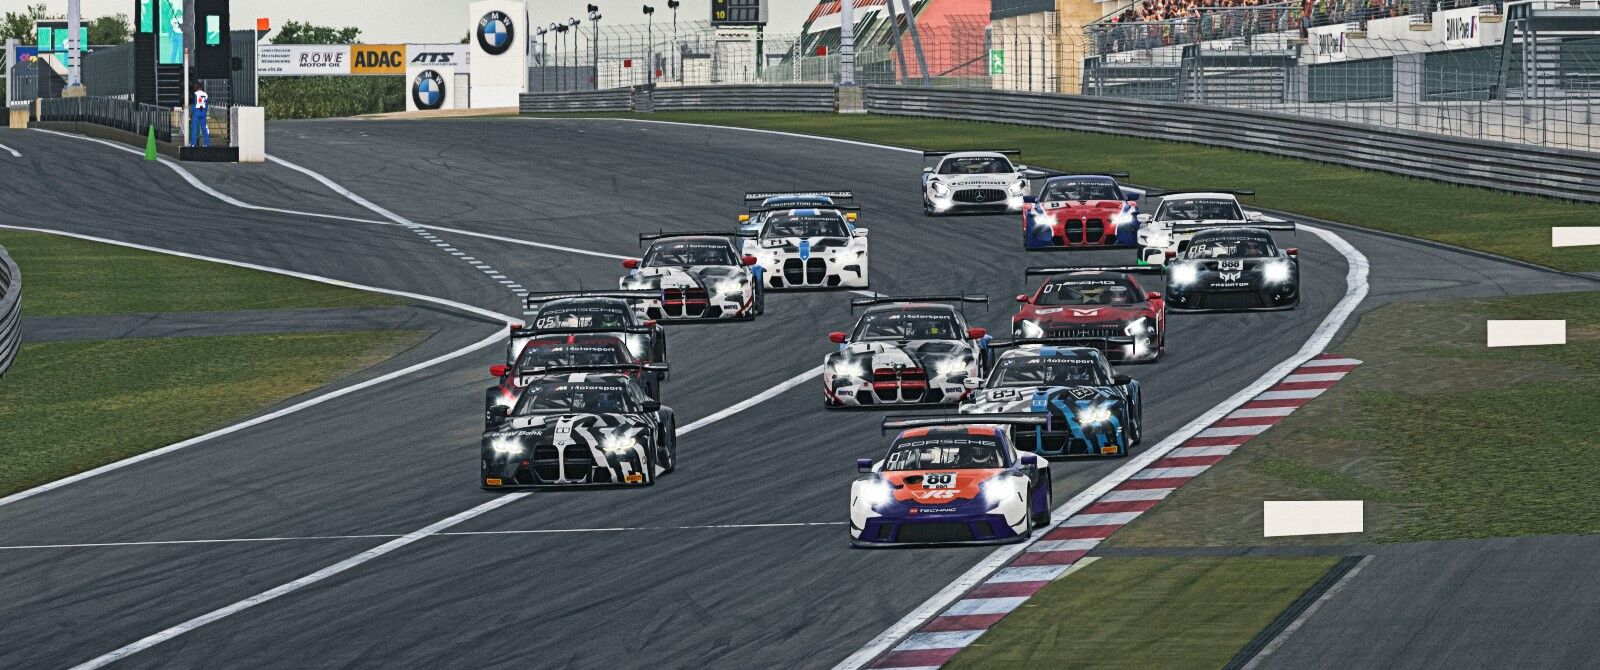 A group of GT3 cars heading towards turn 1 at the Nurburgring